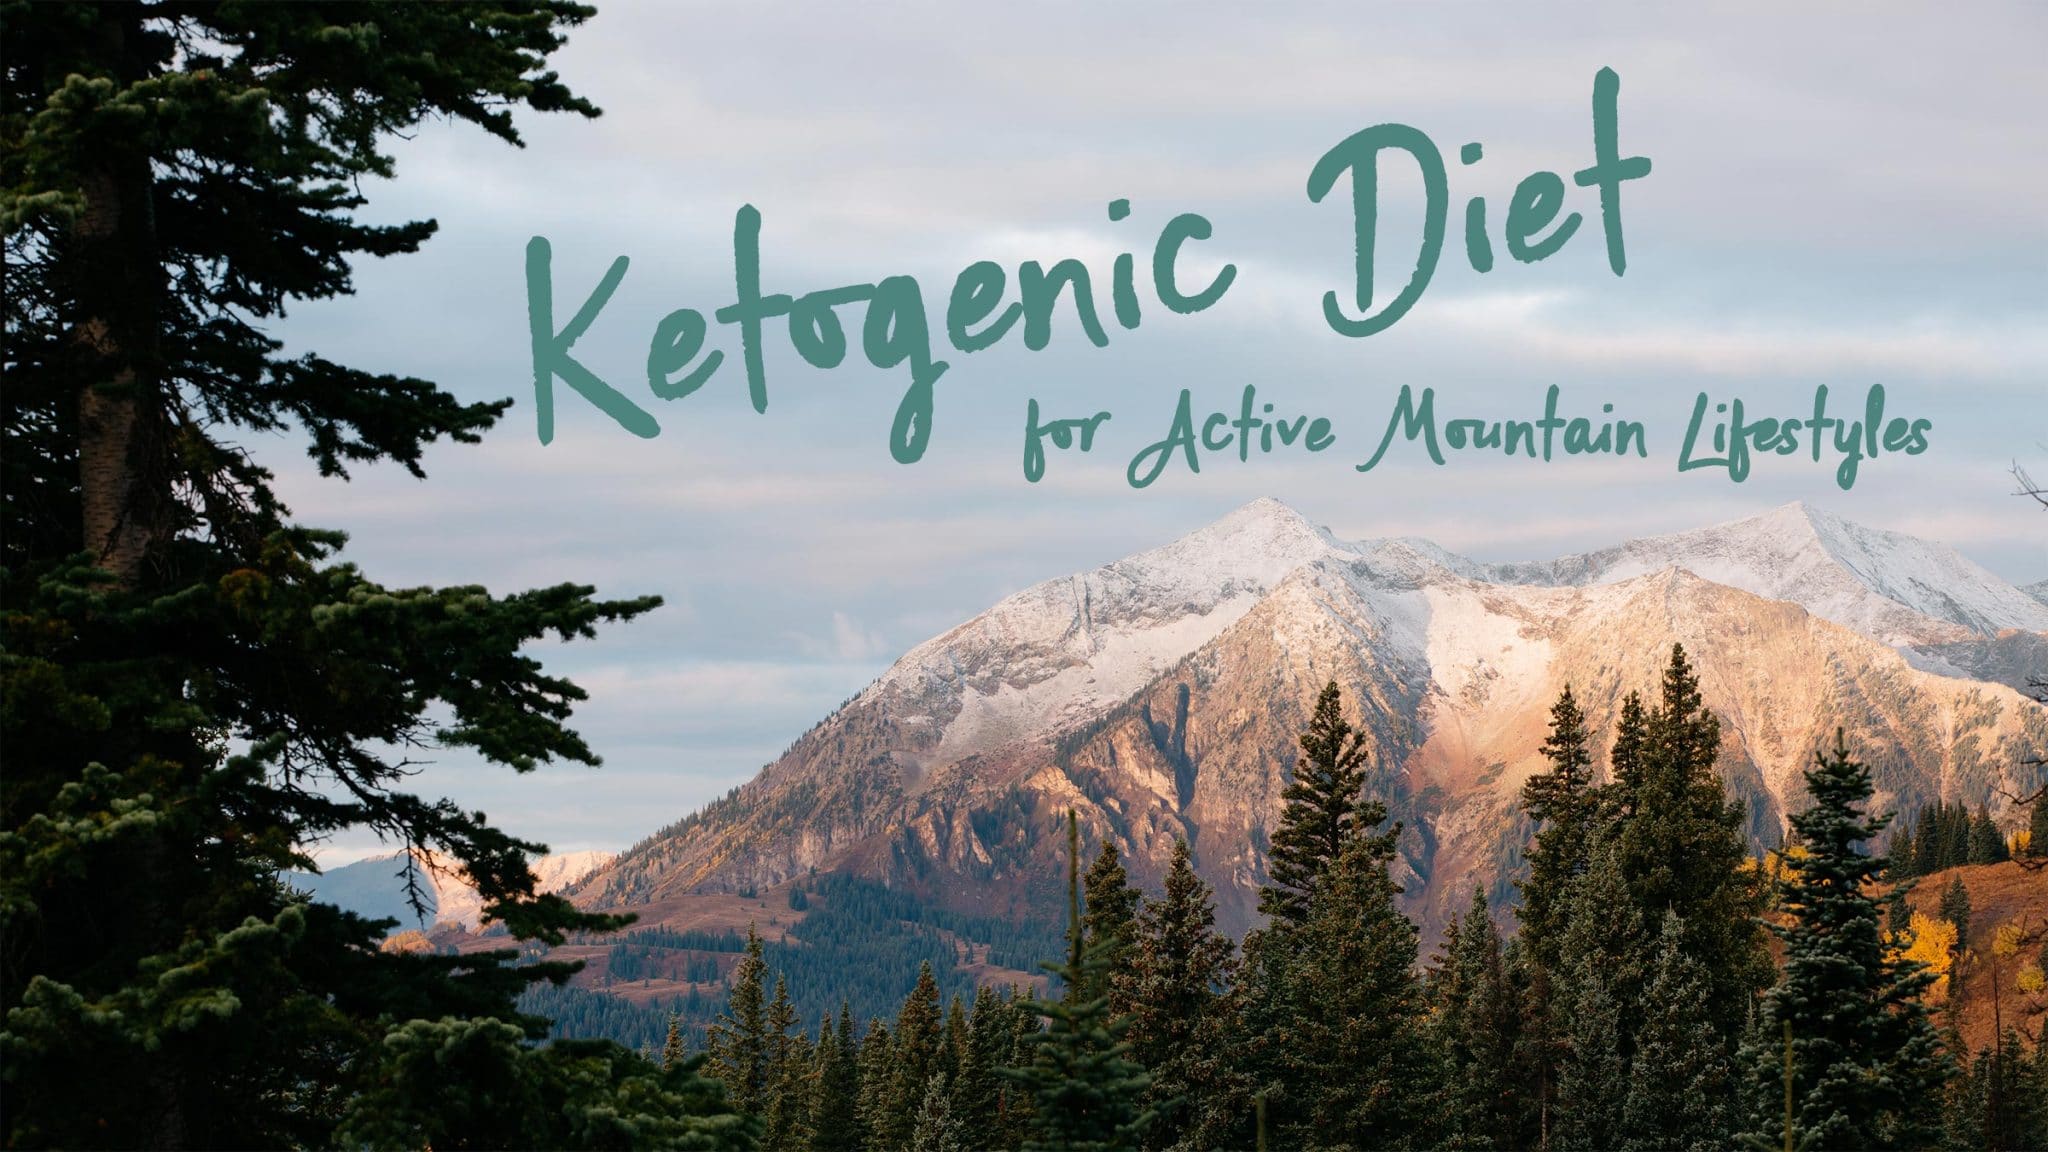 Ketogenic Diet – An Ideal Diet Plan for Active Mountain Lifestyles